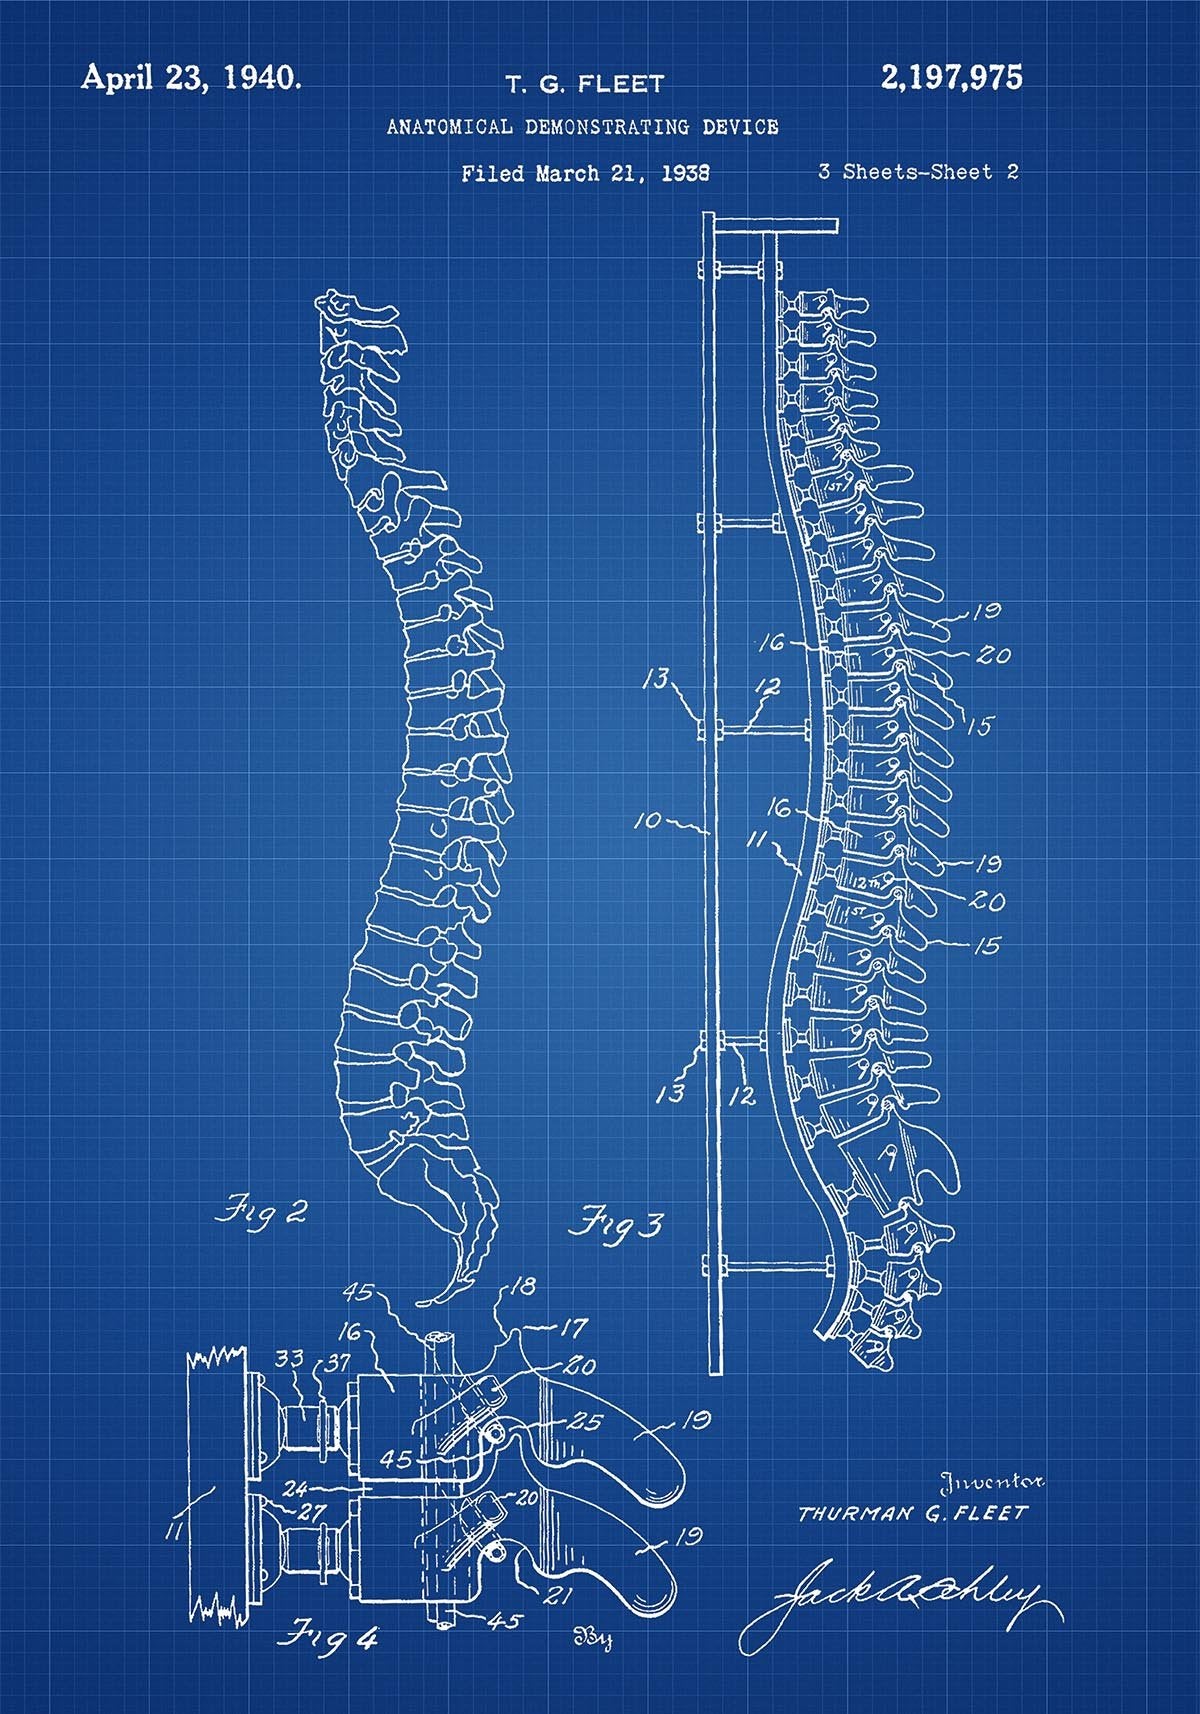 Spine Demonstrating Device Patent Poster